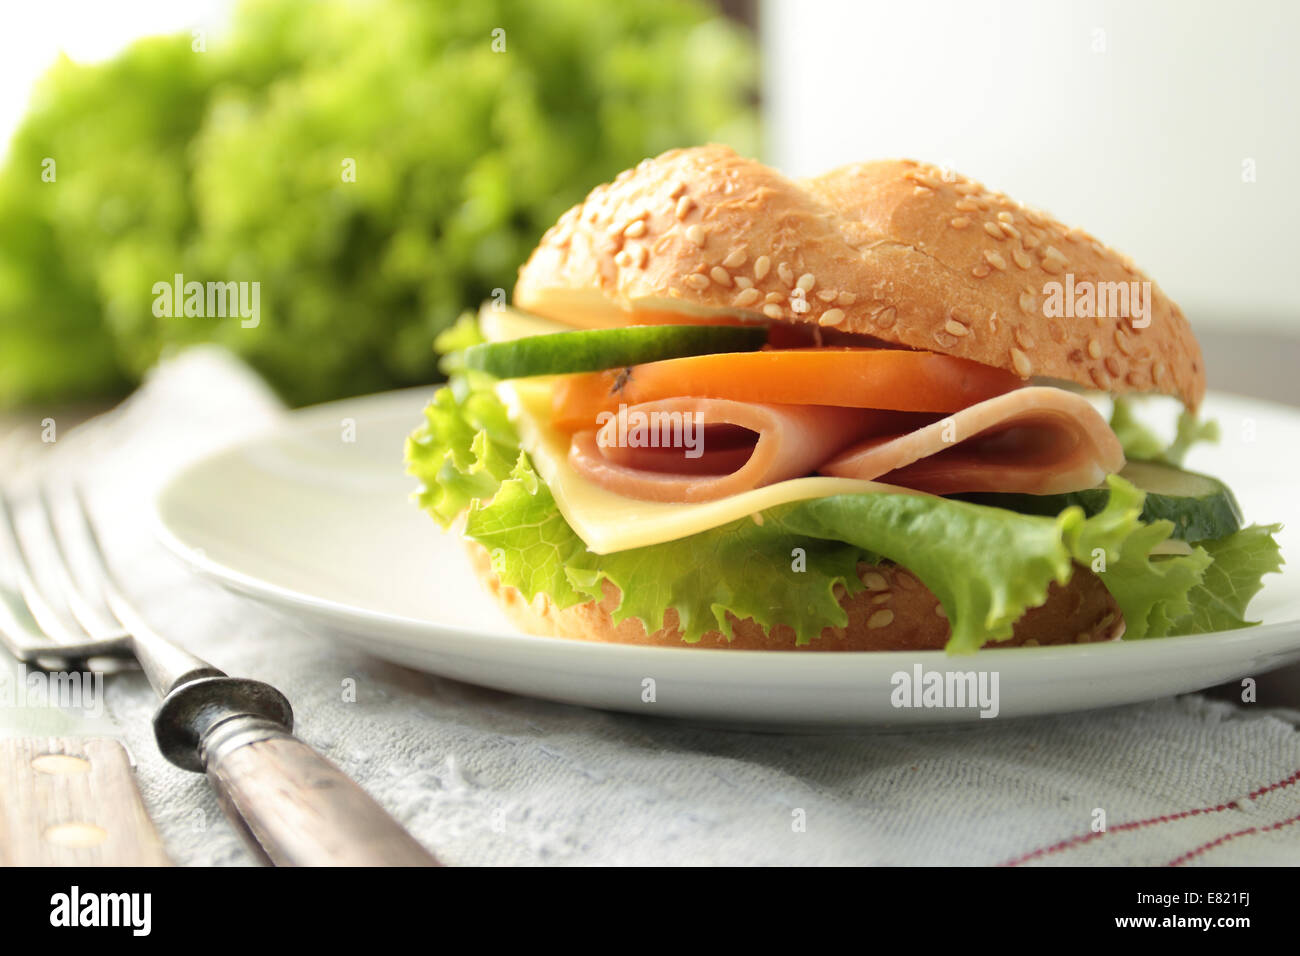 Fresh sandwich with ham and cheese on a plate Stock Photo